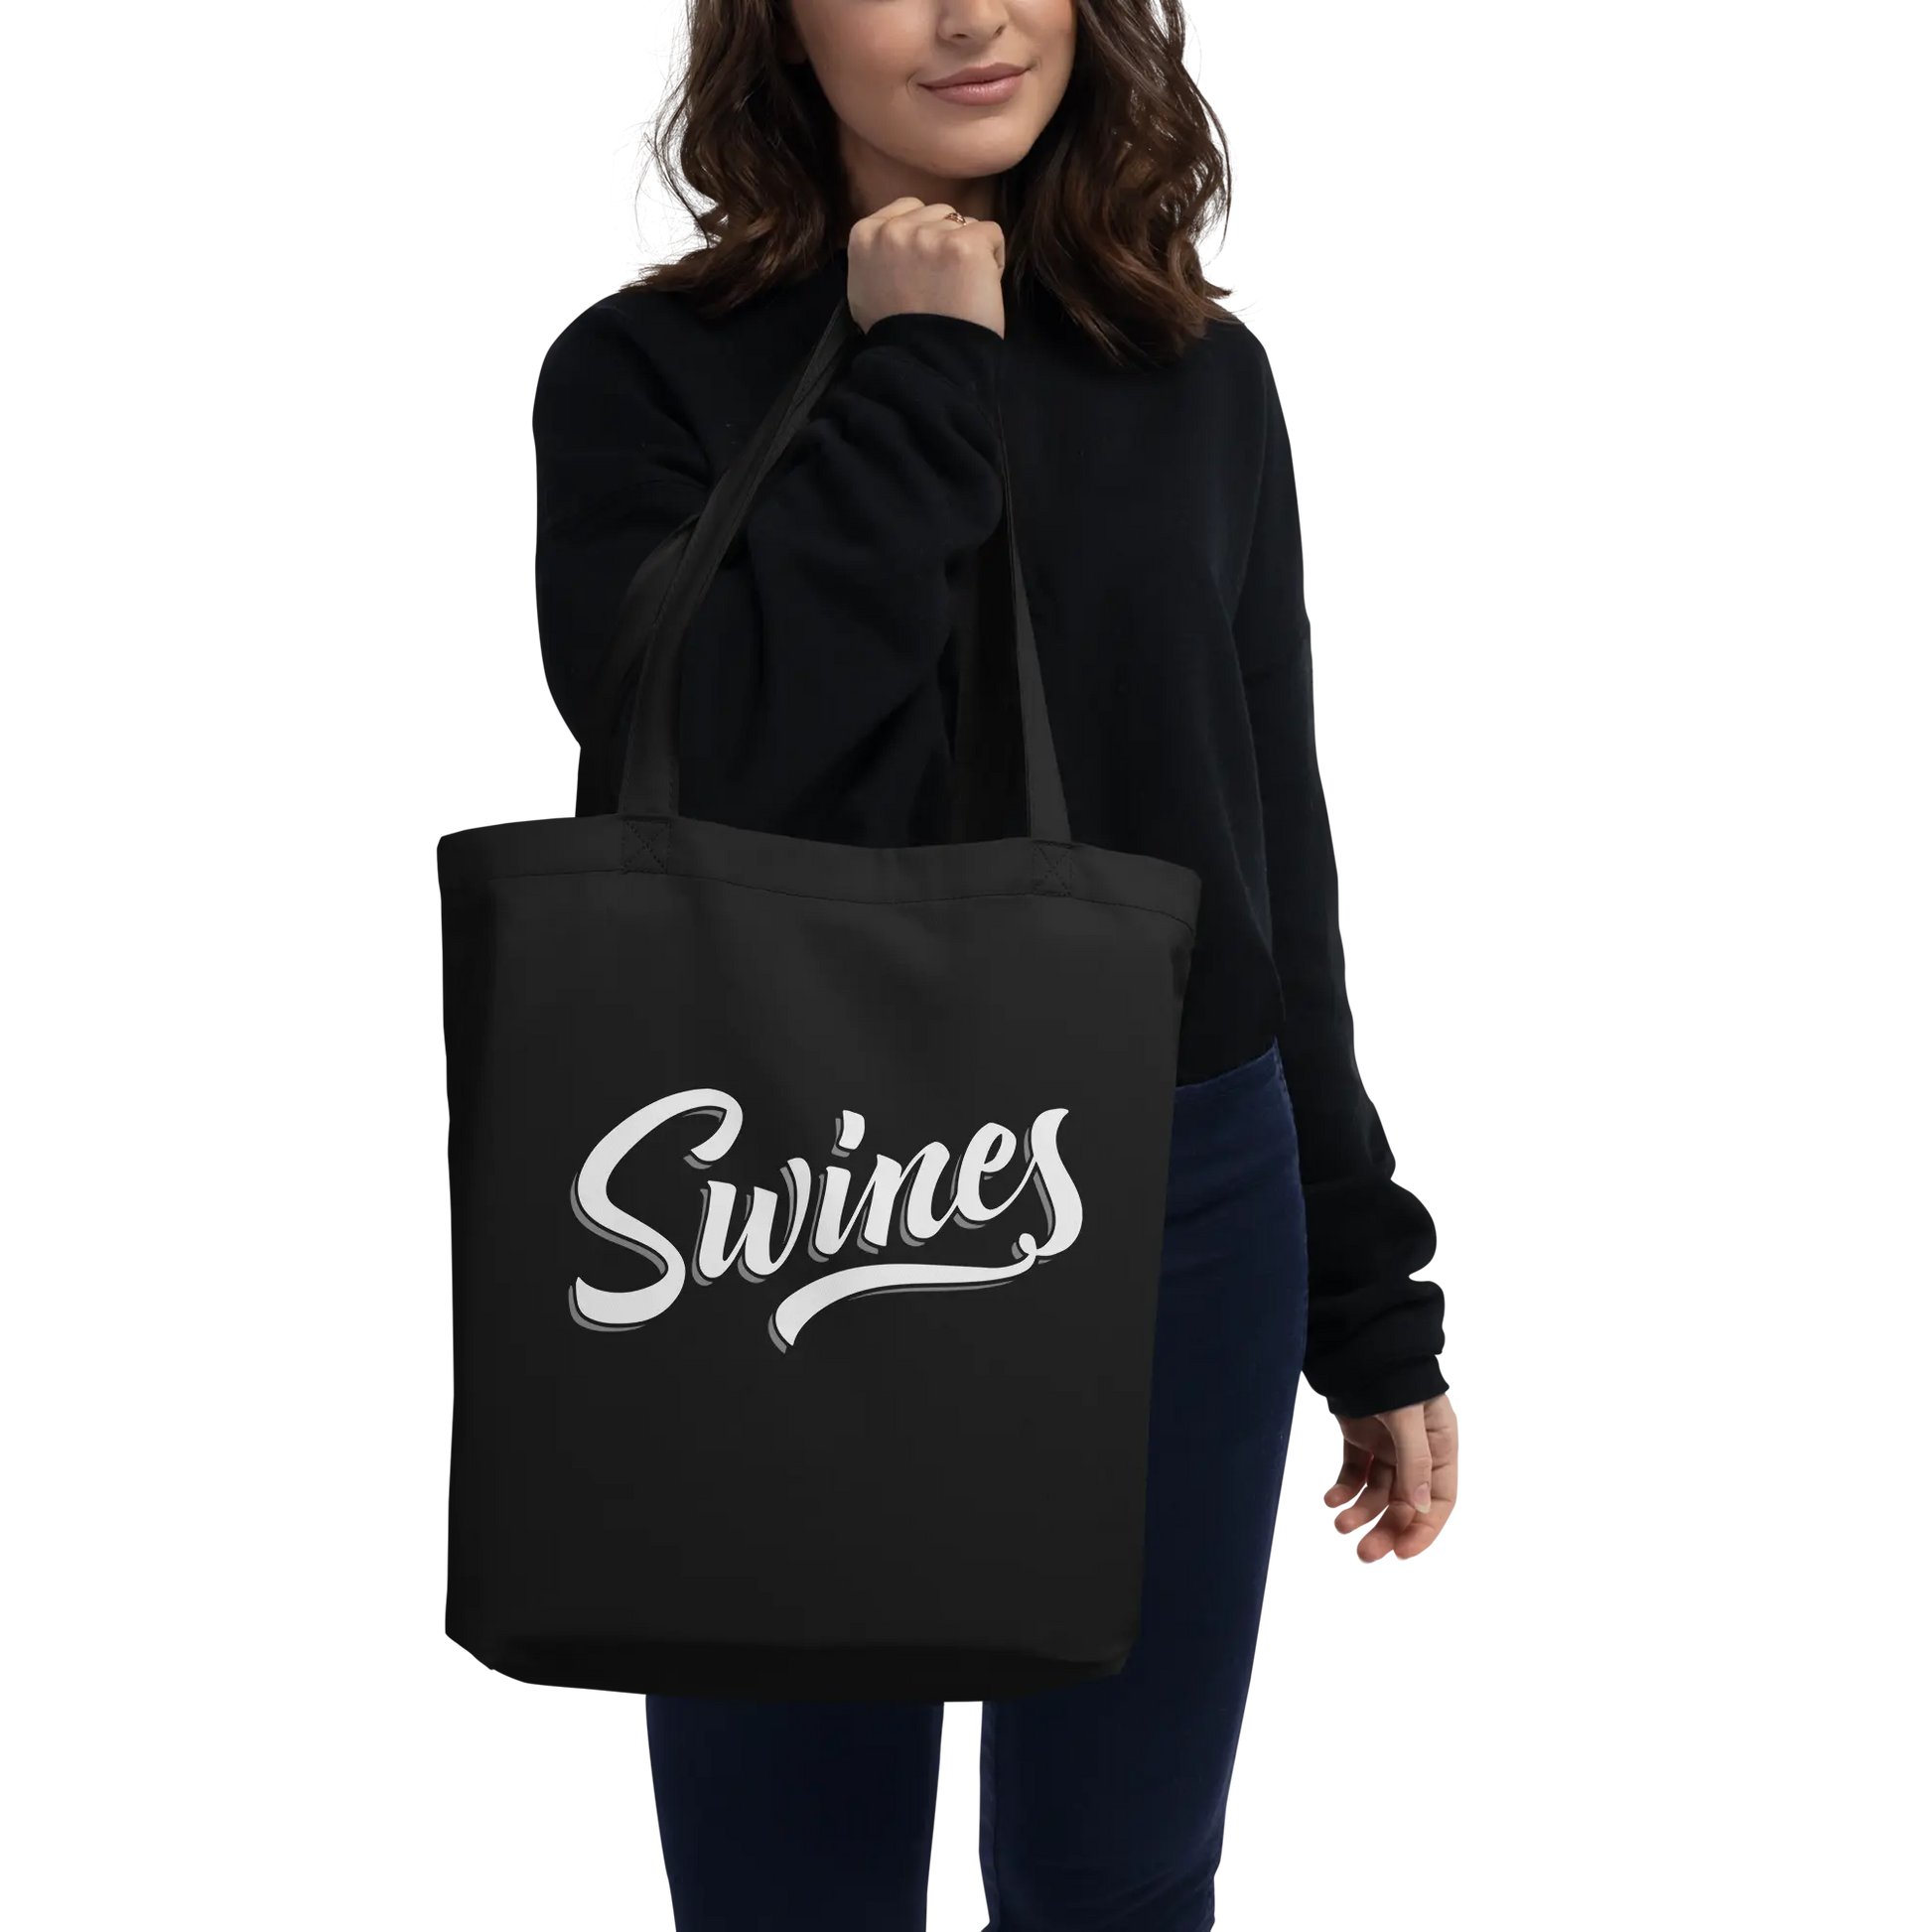 Foil Arms and Hog merchandise black tote shopping bag with SWINES live show logo